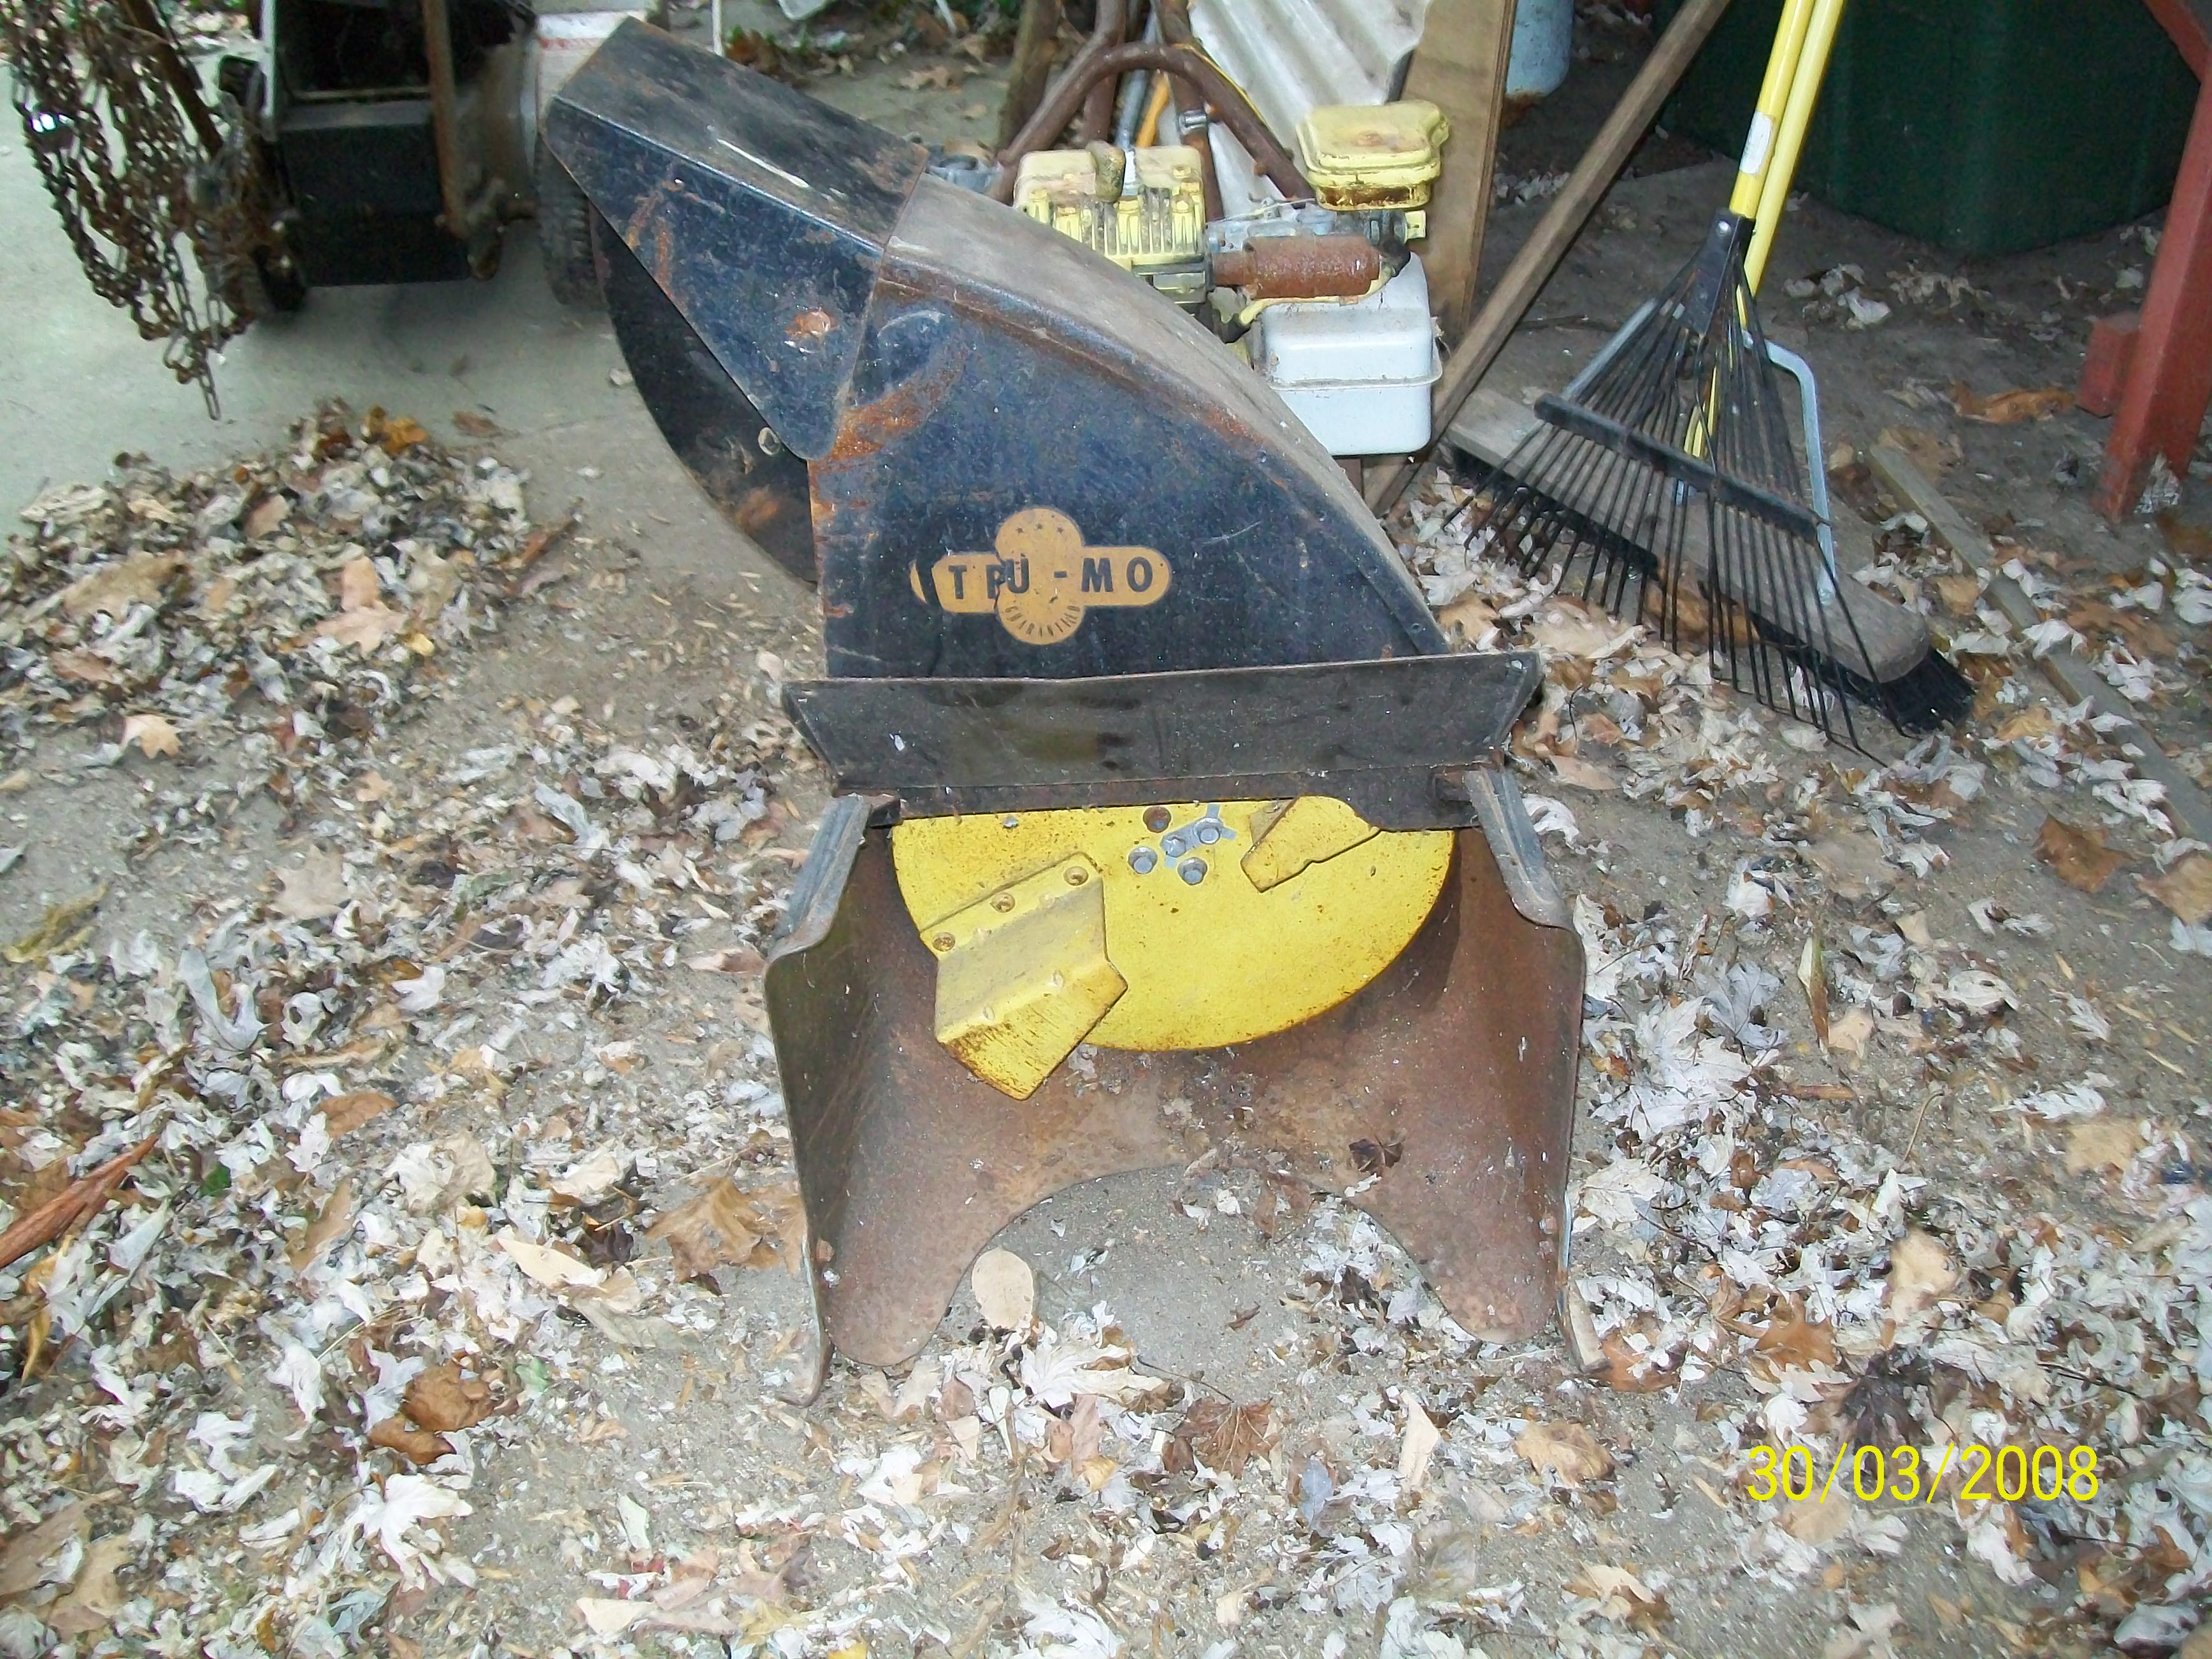 Antique Power Equip Co. snow thrower (2 of 2 pics).JPG